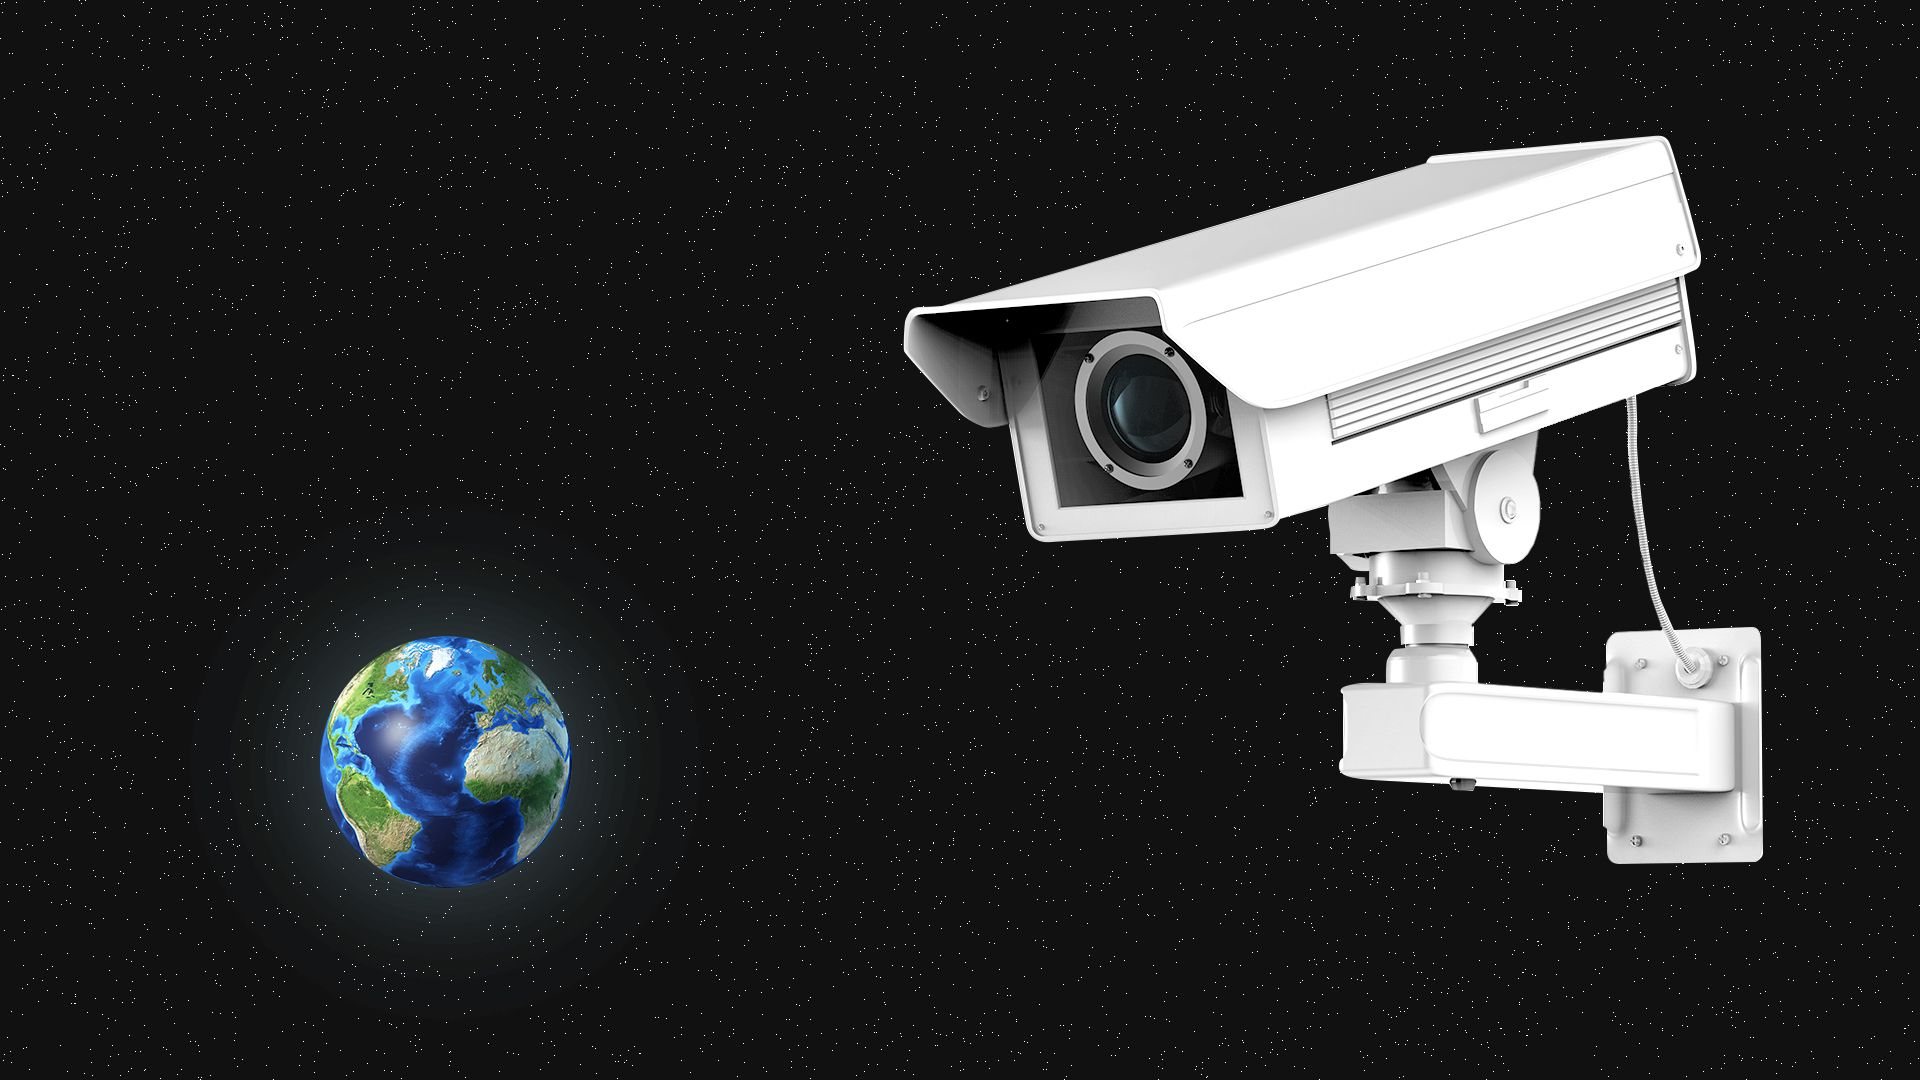 Illustration of a large surveillance camera examining a small Earth in orbit.